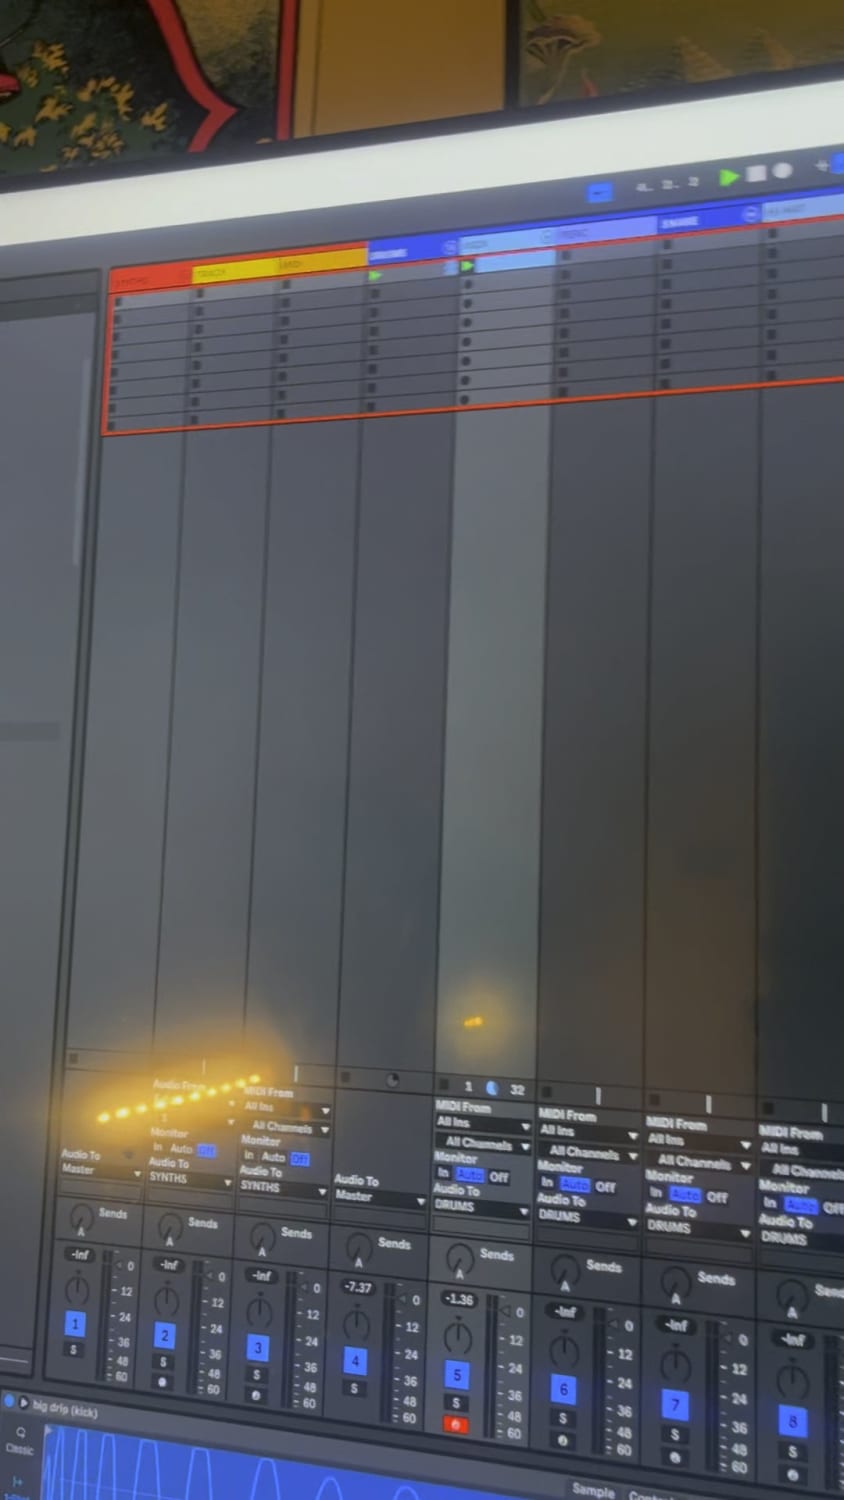 Why does Ableton crash my interface when something is “loud”? The kick doesn’t even reach 0db w/ a soft-clipped saturator on the master. Any is help appreciated